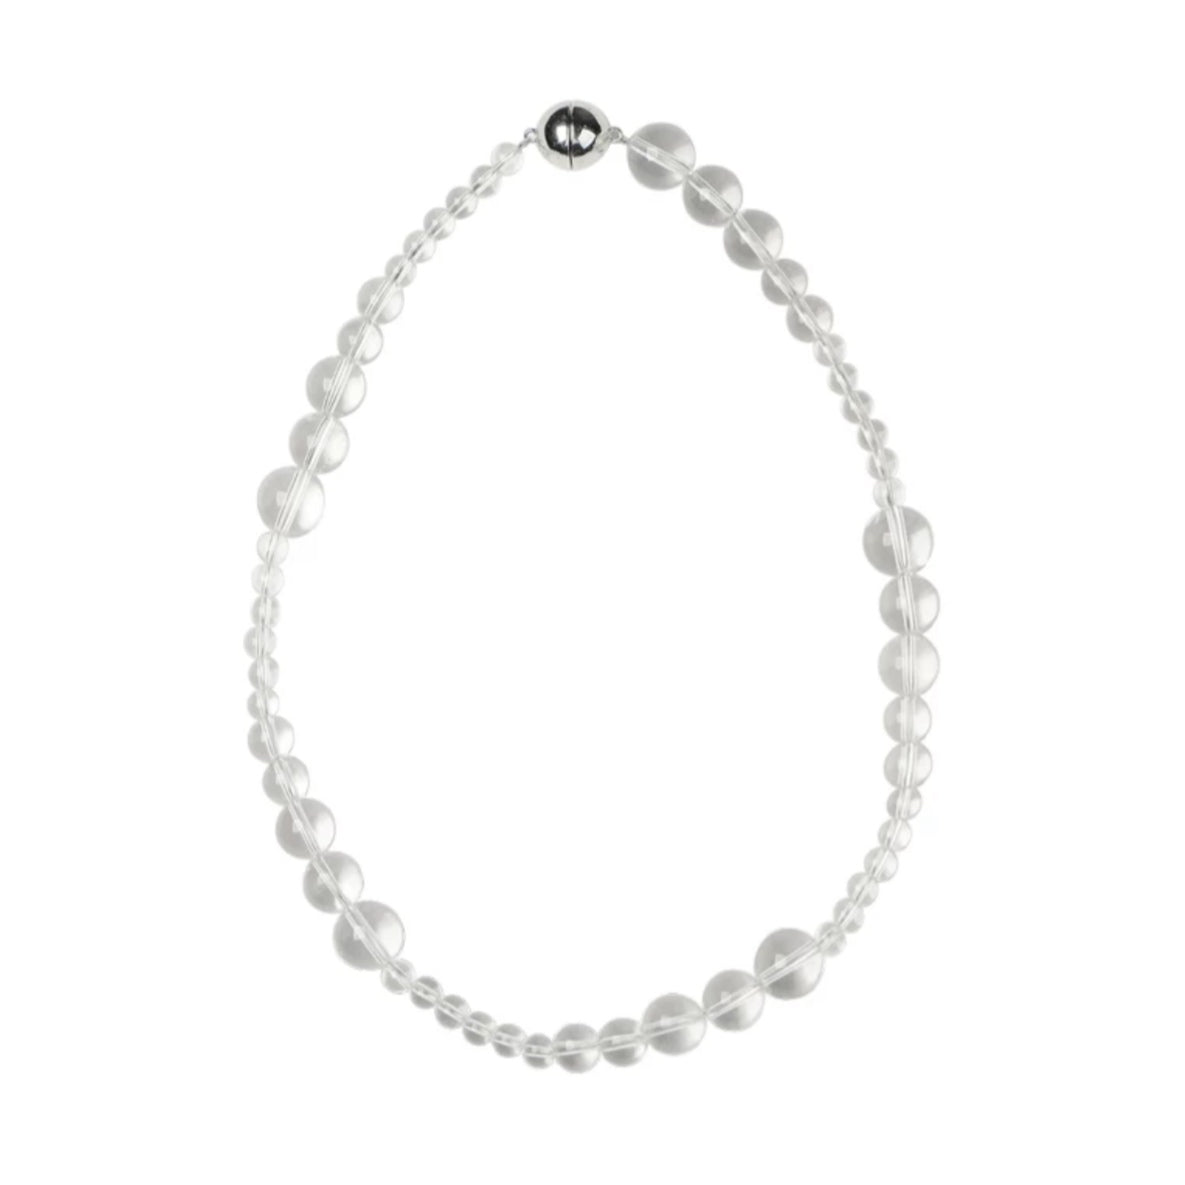 Transparent Natural White Crystal Necklace